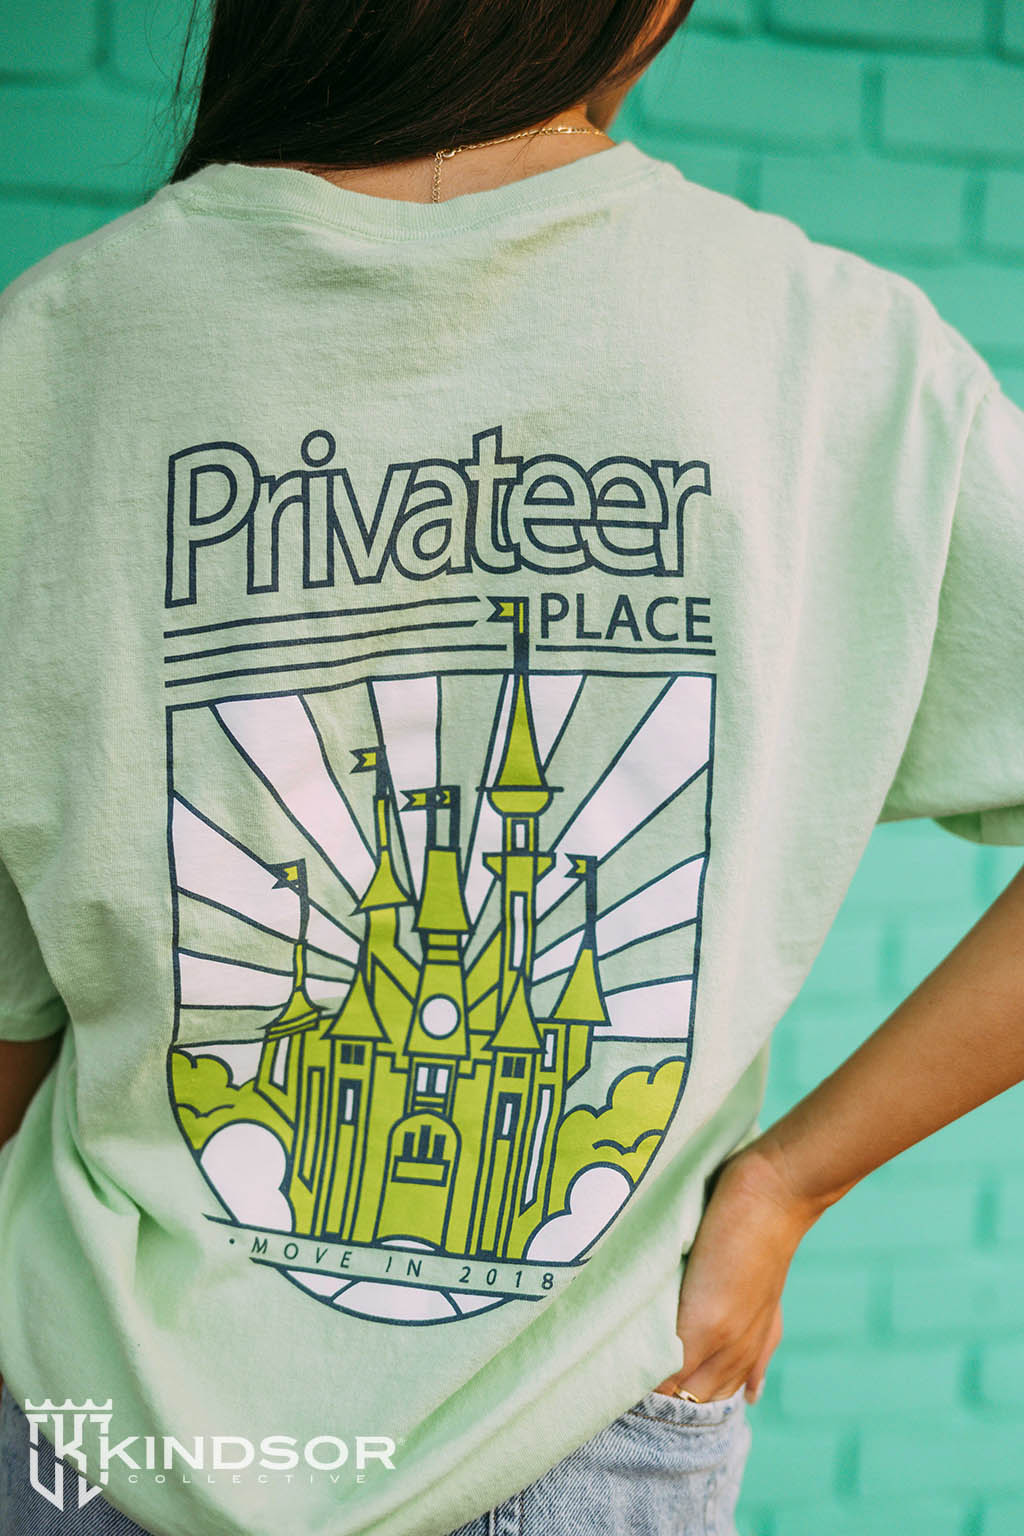 Privateer Place Staff Move In Tshirt